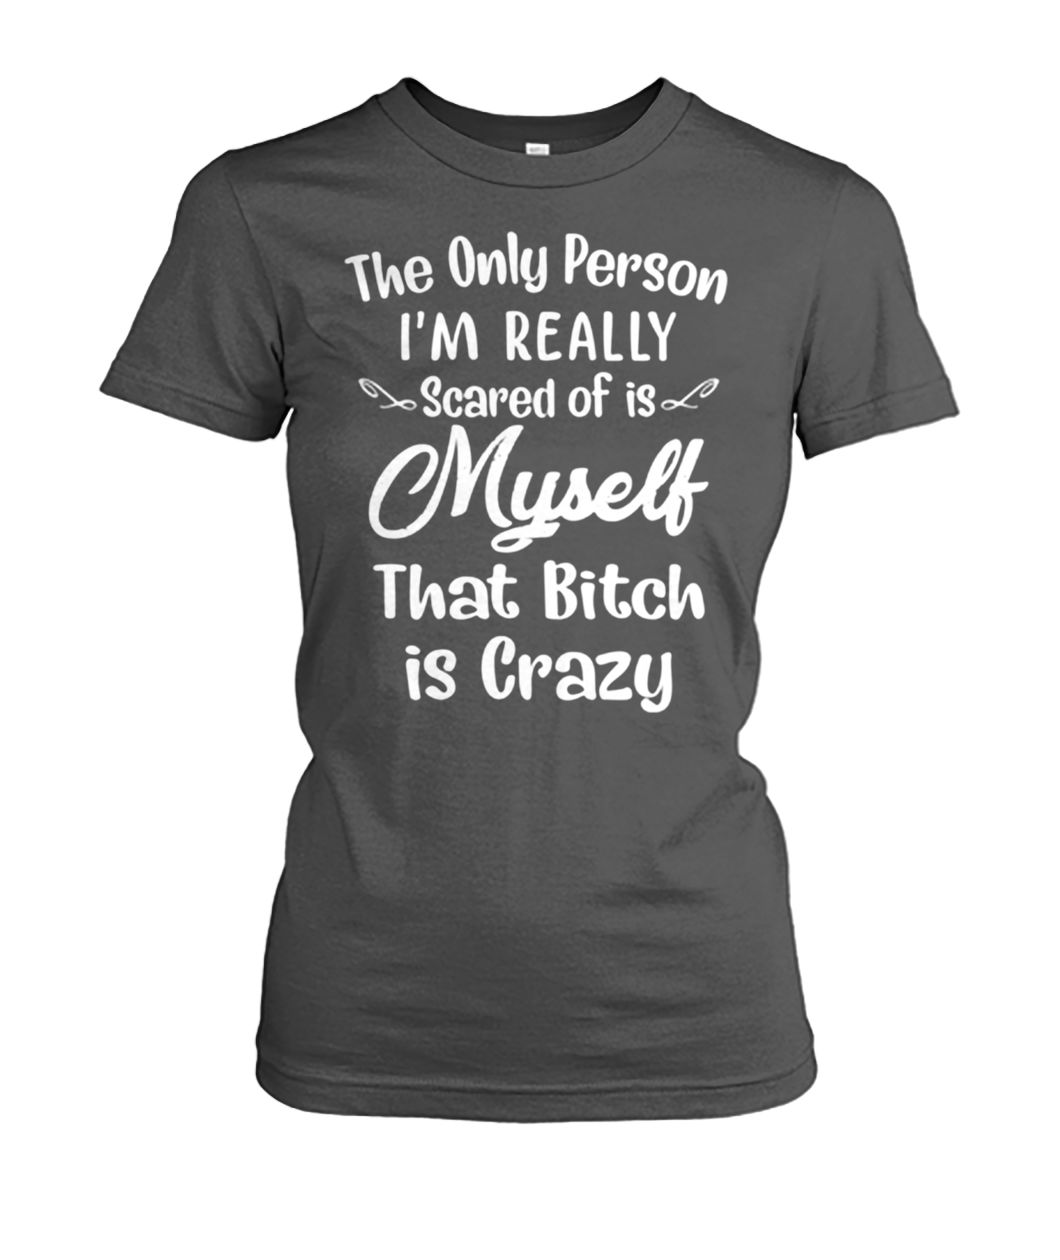 The only person I'm really scared of is myself that bitch is crazy women's crew tee